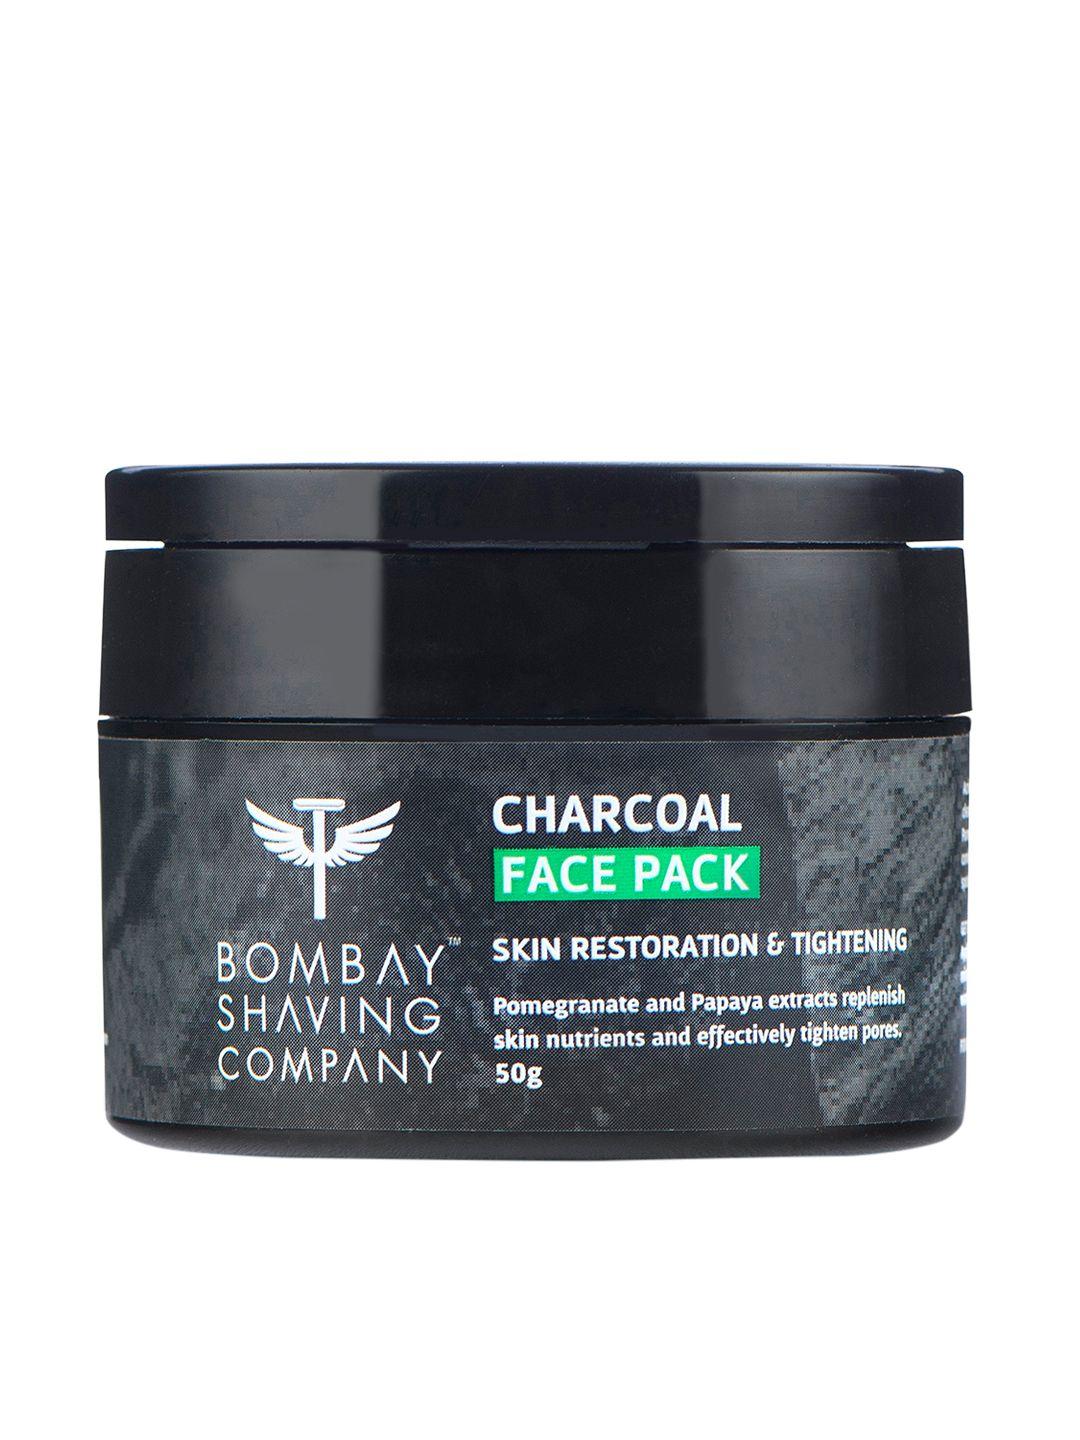 bombay shaving company unisex charcoal face pack 50gm